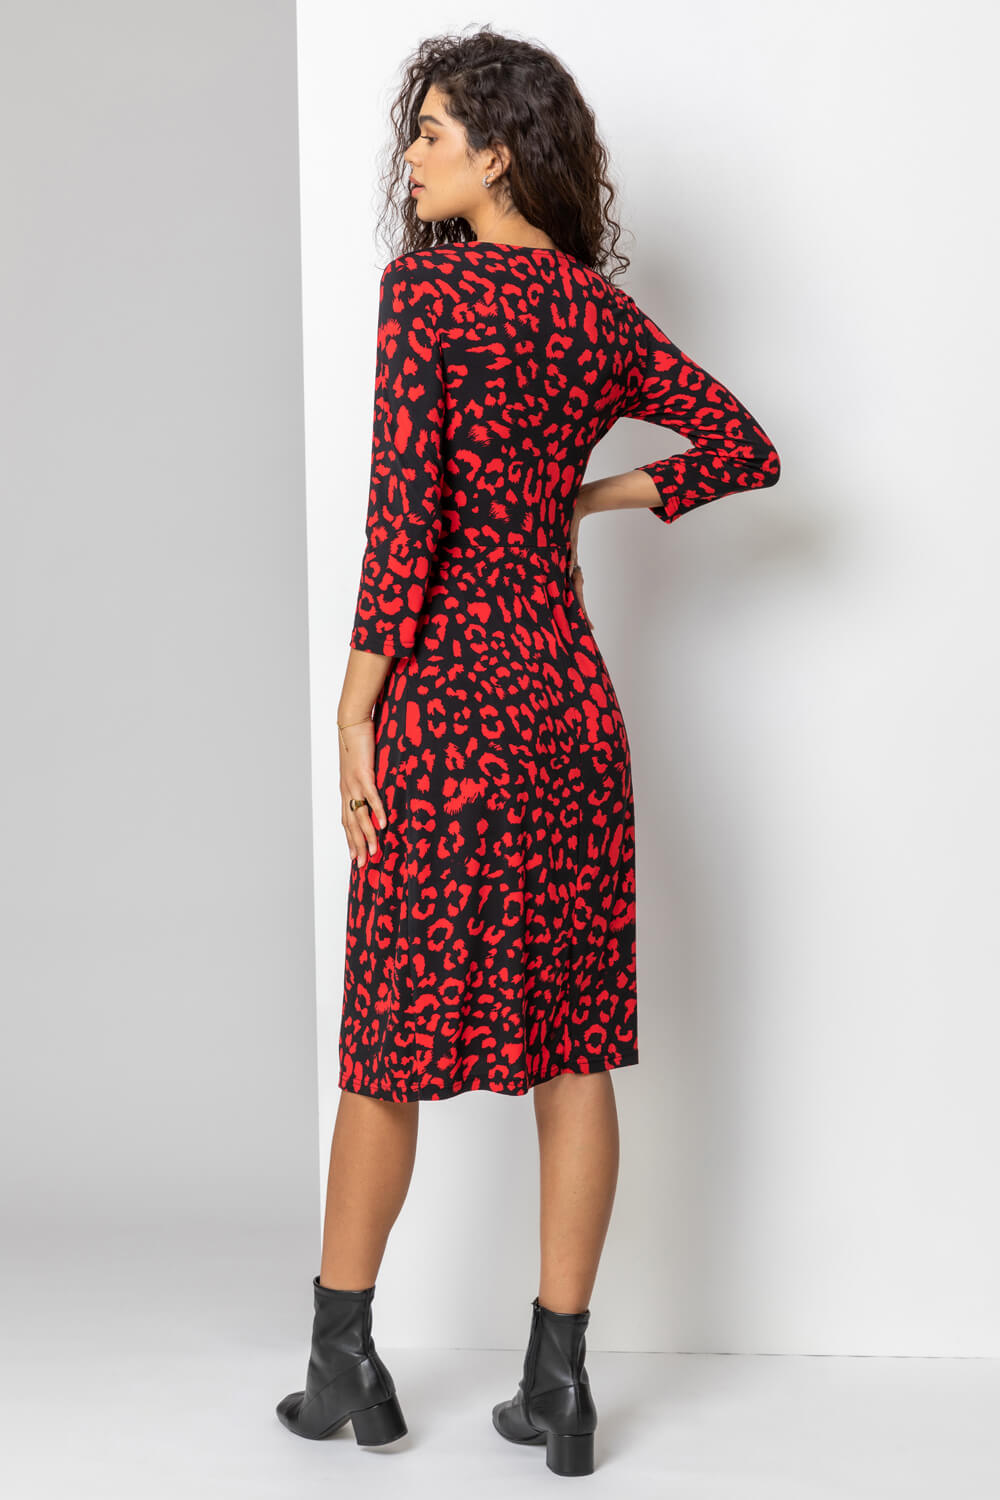 Red Animal Print Fit And Flare Dress, Image 2 of 4